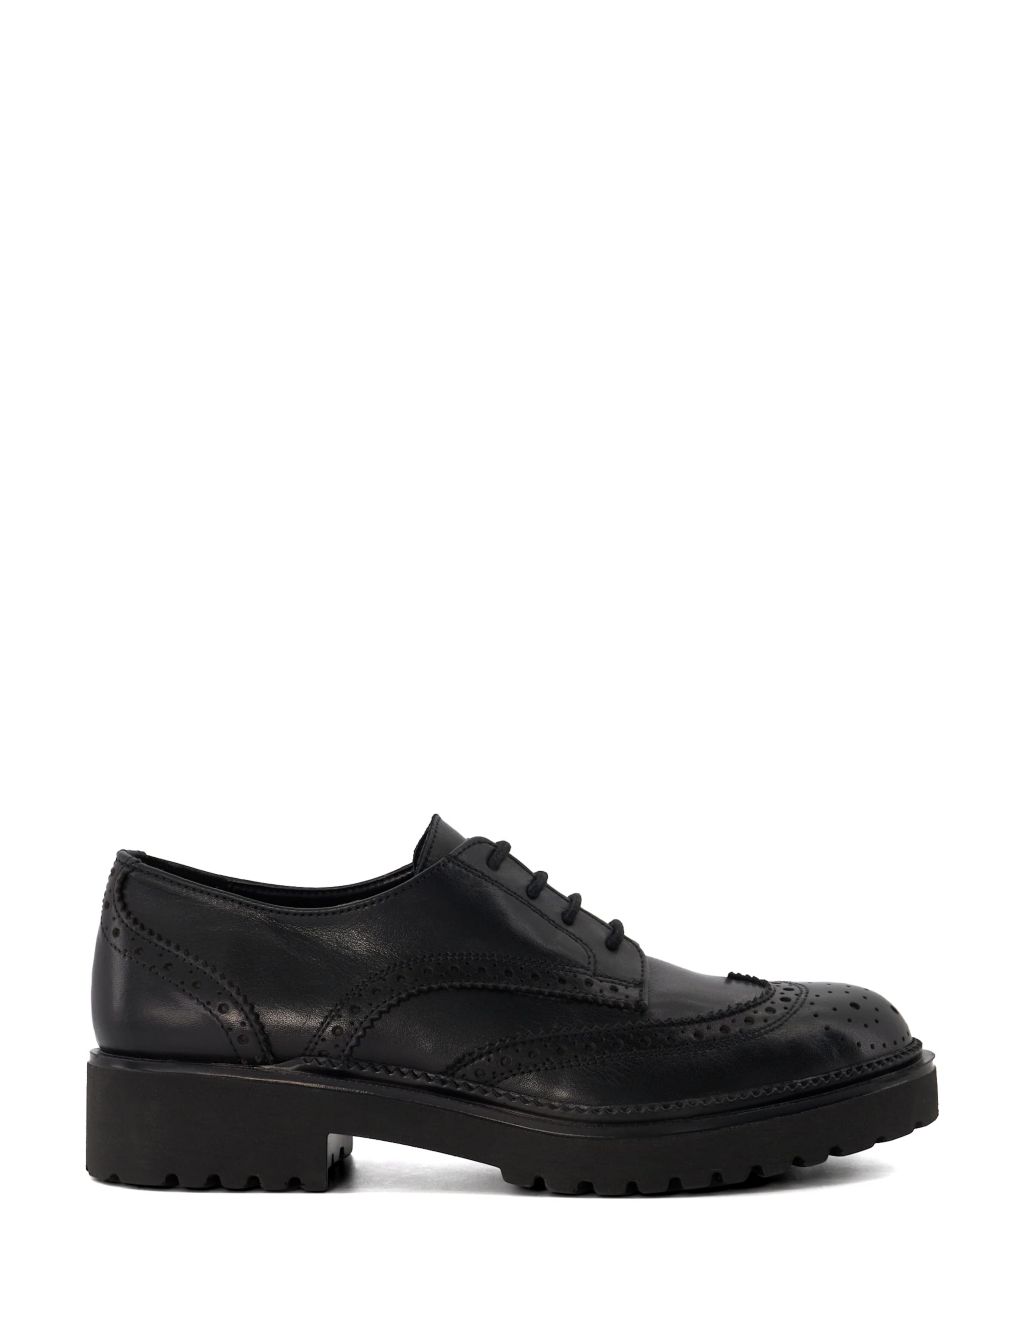 Leather Chunky Lace Up Brogues | Dune London | M&S